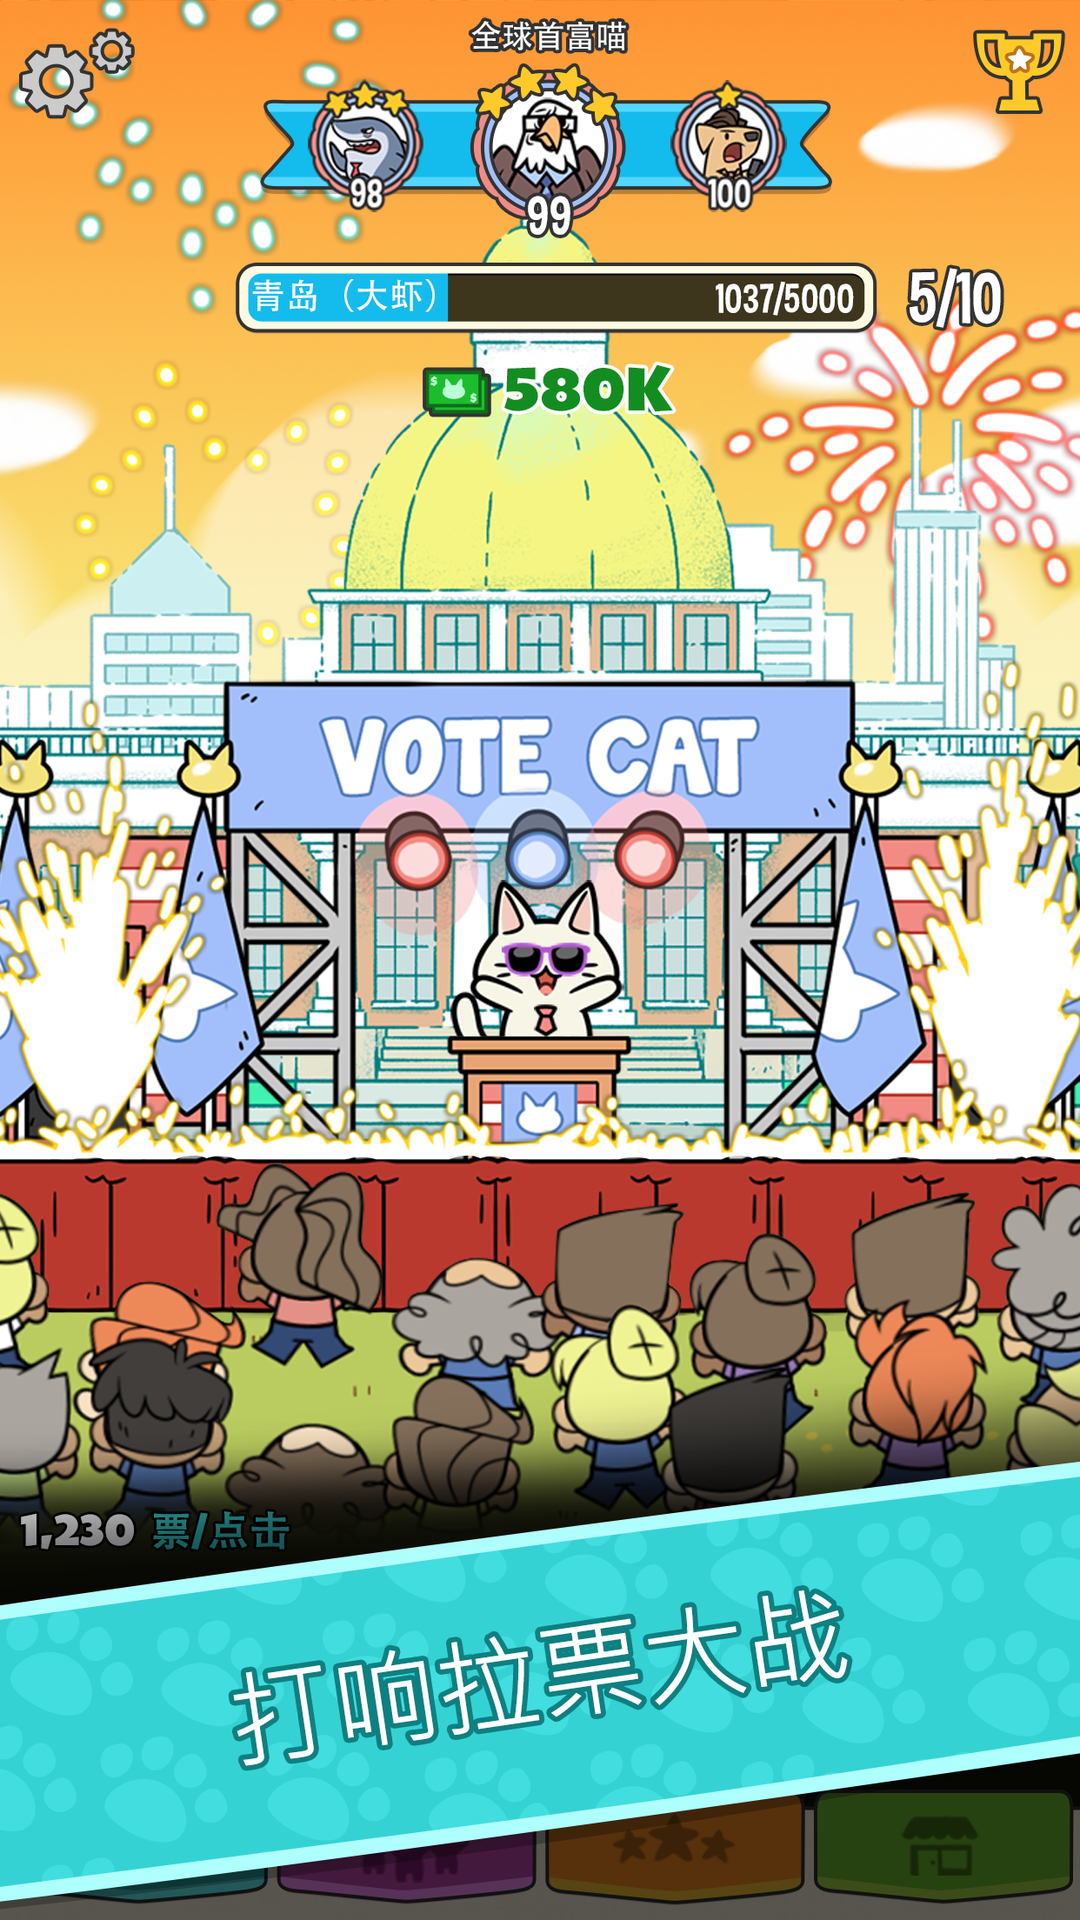 politicats removed